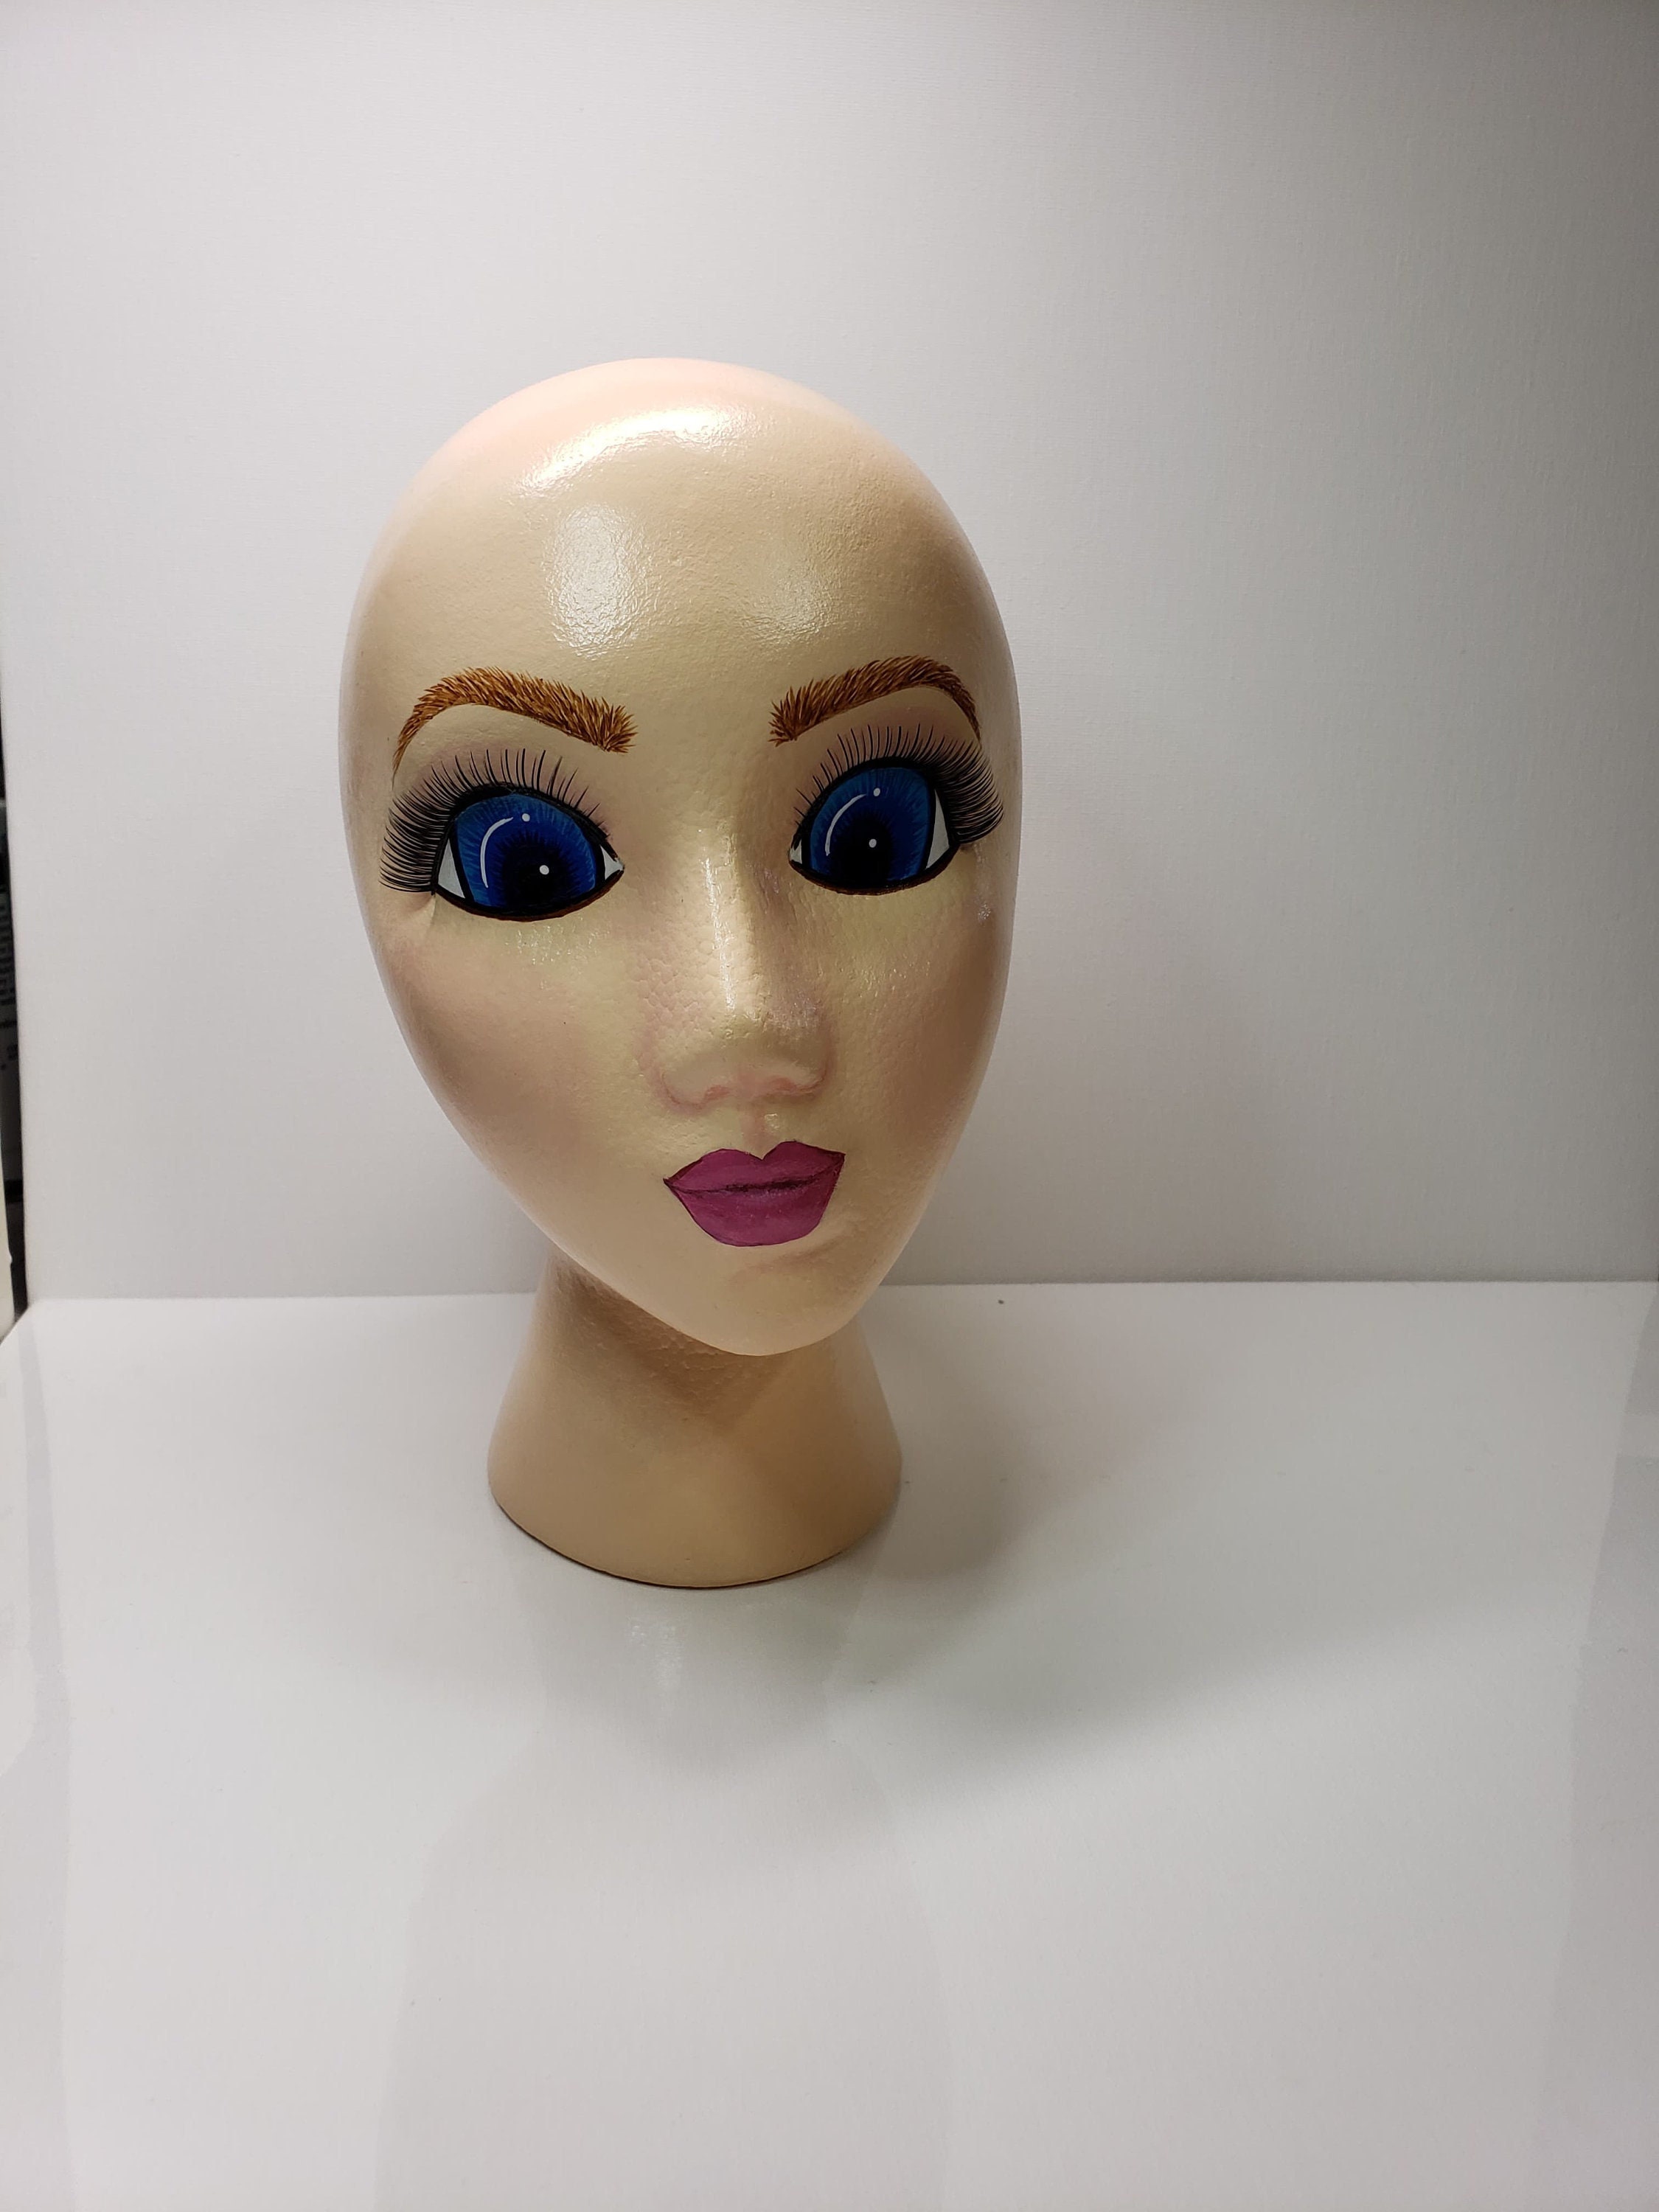 NQSW Glasses Display Stand Hairpieces Stand Holder Female Head Model Dummy  Foam Mannequin Styrofoam Mannequin Head Foam Wig Head Head Model